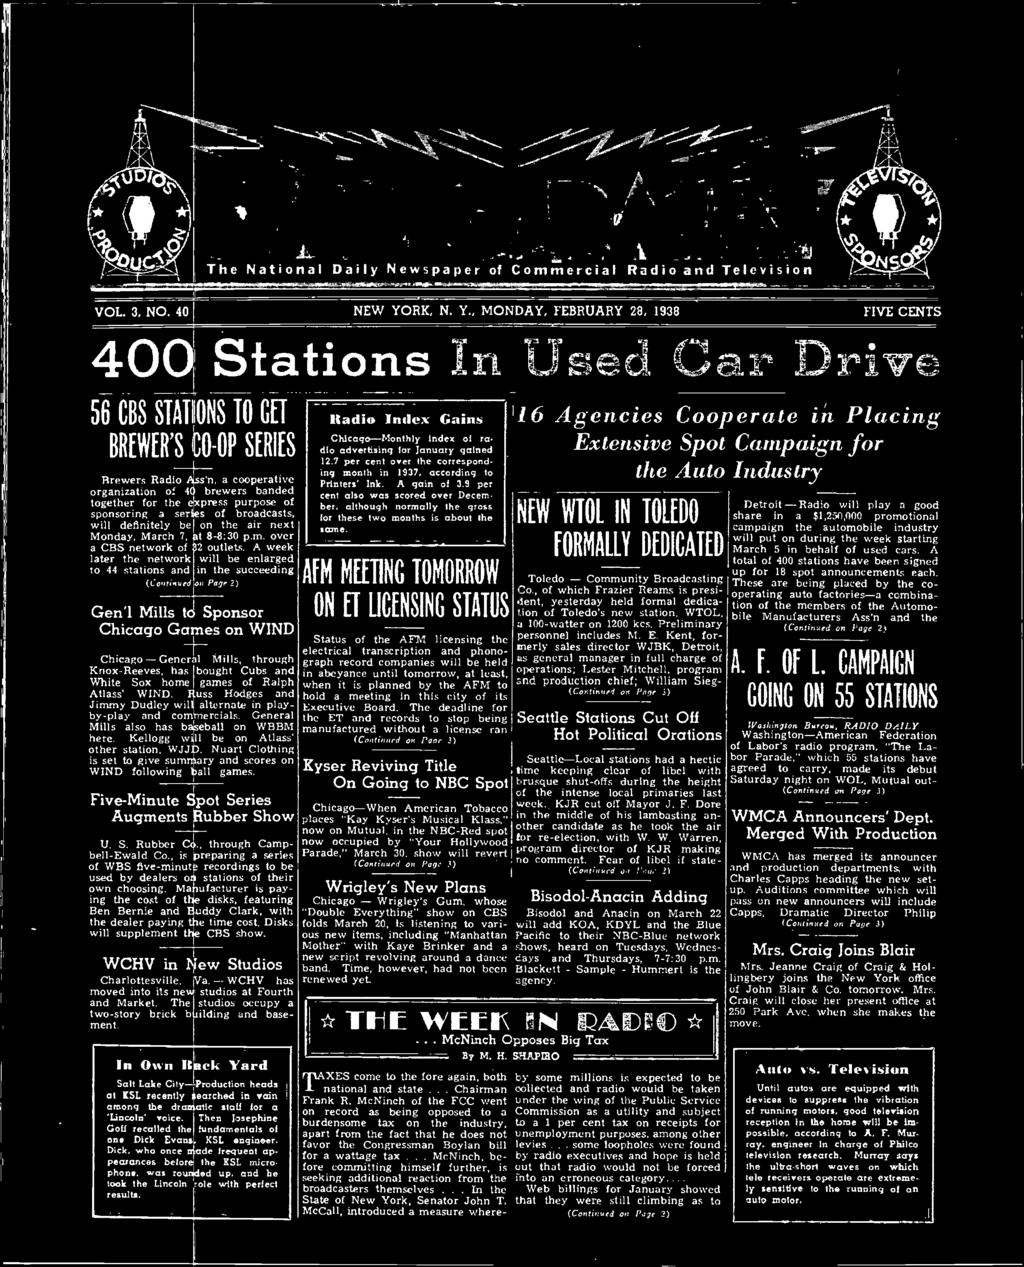 , MONDAY, FEBRUARY 28, 1938 FIVE CENTS 400 Stations In Used Car Drive 56 CBS STATIONS TO GET BREWER'S CO-OP SERIES Brewers Radio Ass'n, a cooperative organization of 40 brewers banded together for